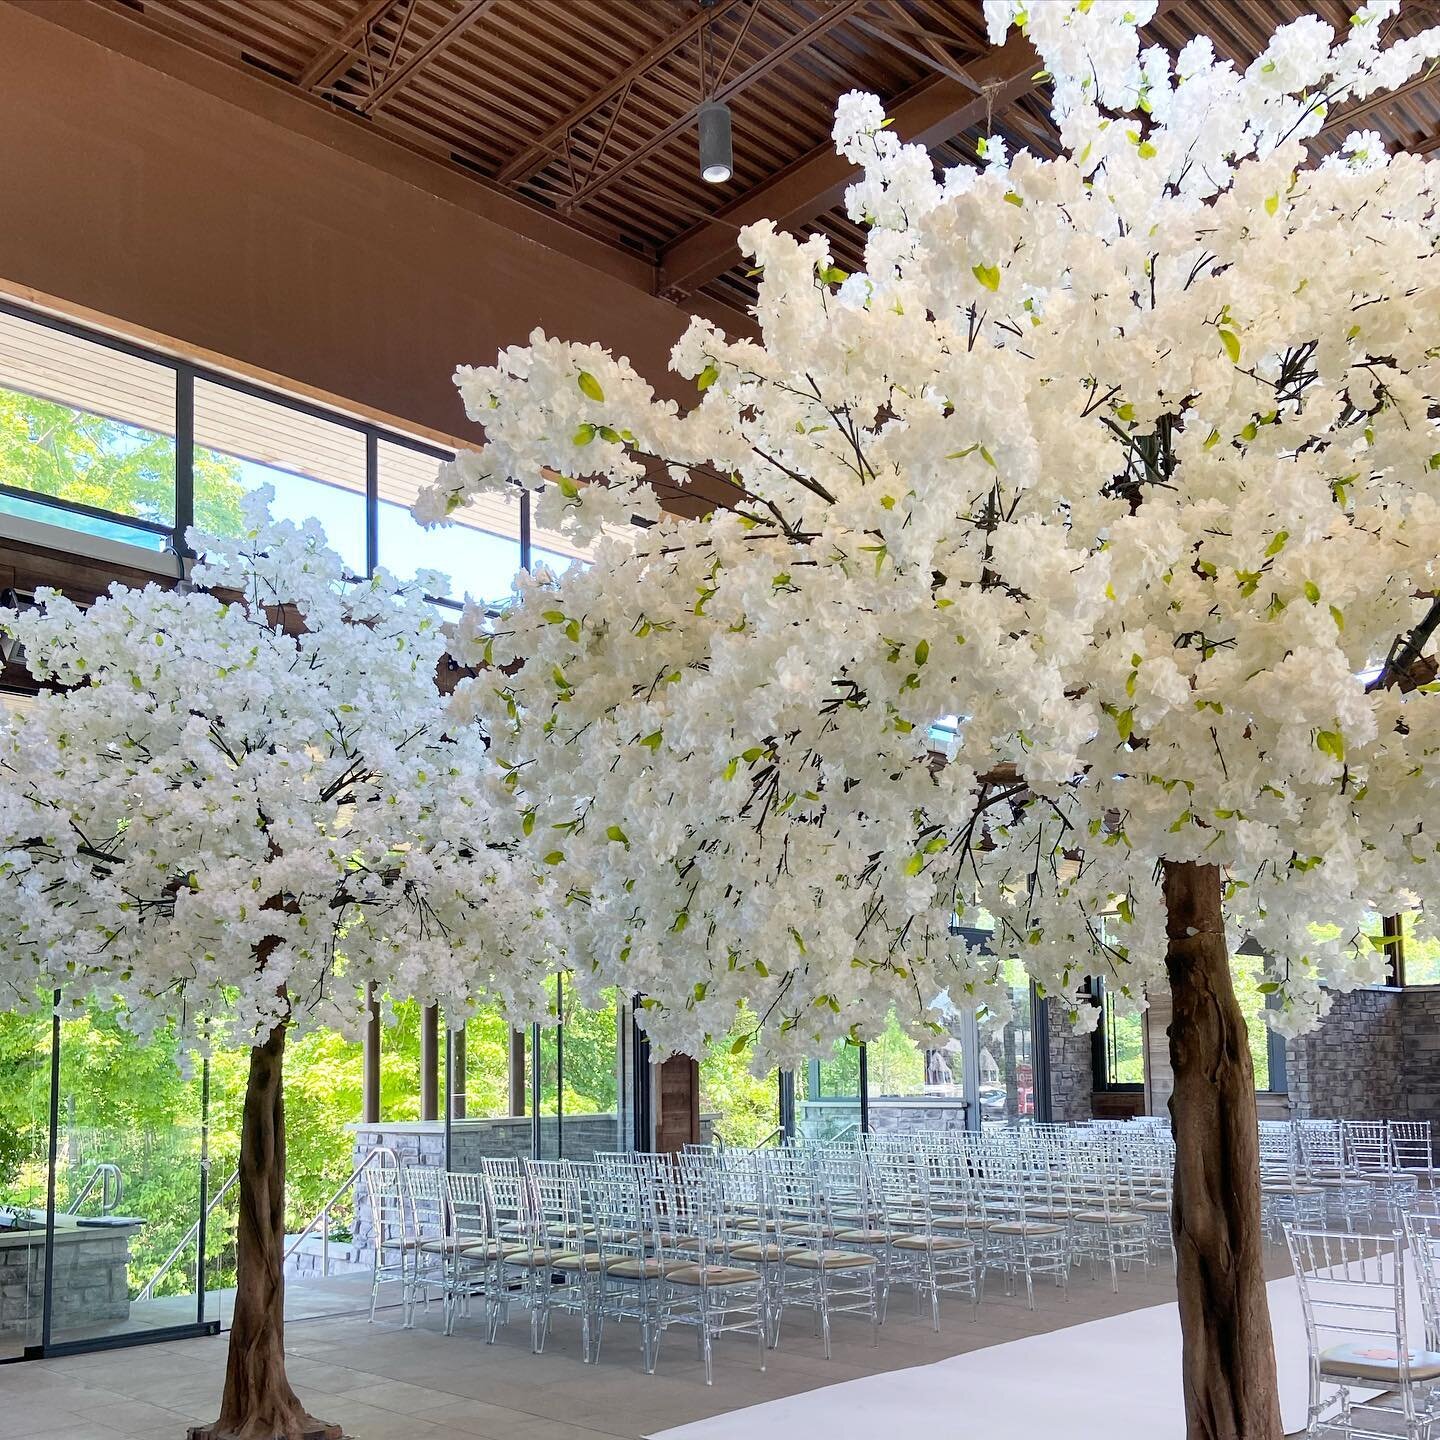 Our lush 11&rsquo; white cherry blossom trees fit perfectly within this grand gazebo. They greeted guests for a beautiful day of wedding festivities 🤍✨

To reserve these for your next event, please email us at rentals@parasevents.ca

#ParasEvents #P